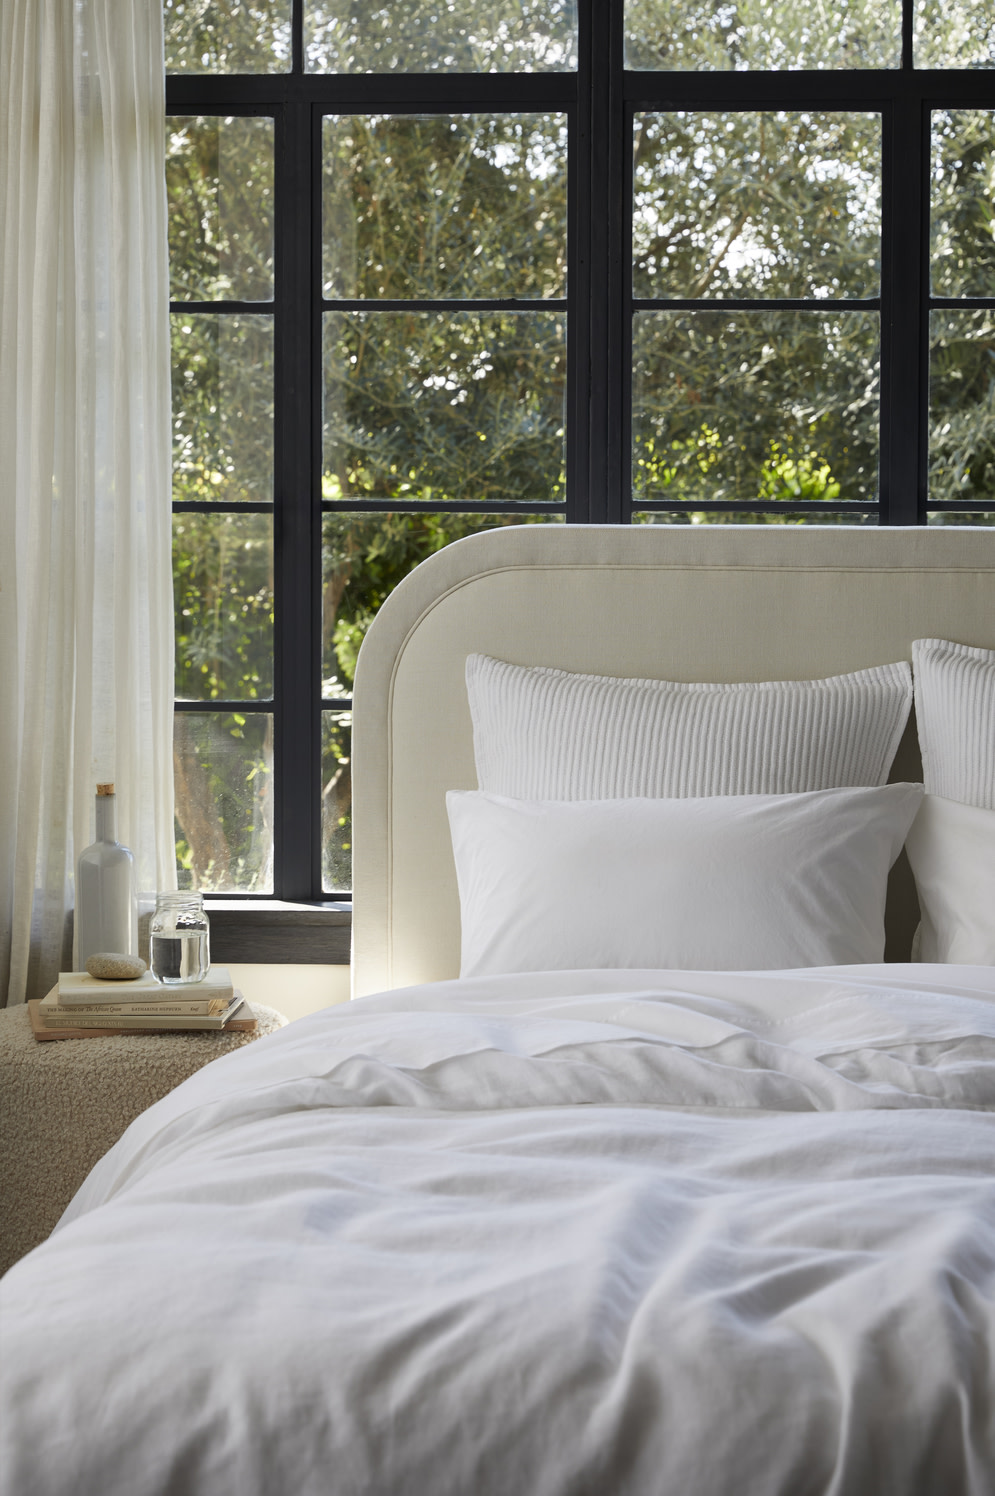 Linen and percale bedding on a cream headboard bed frame.